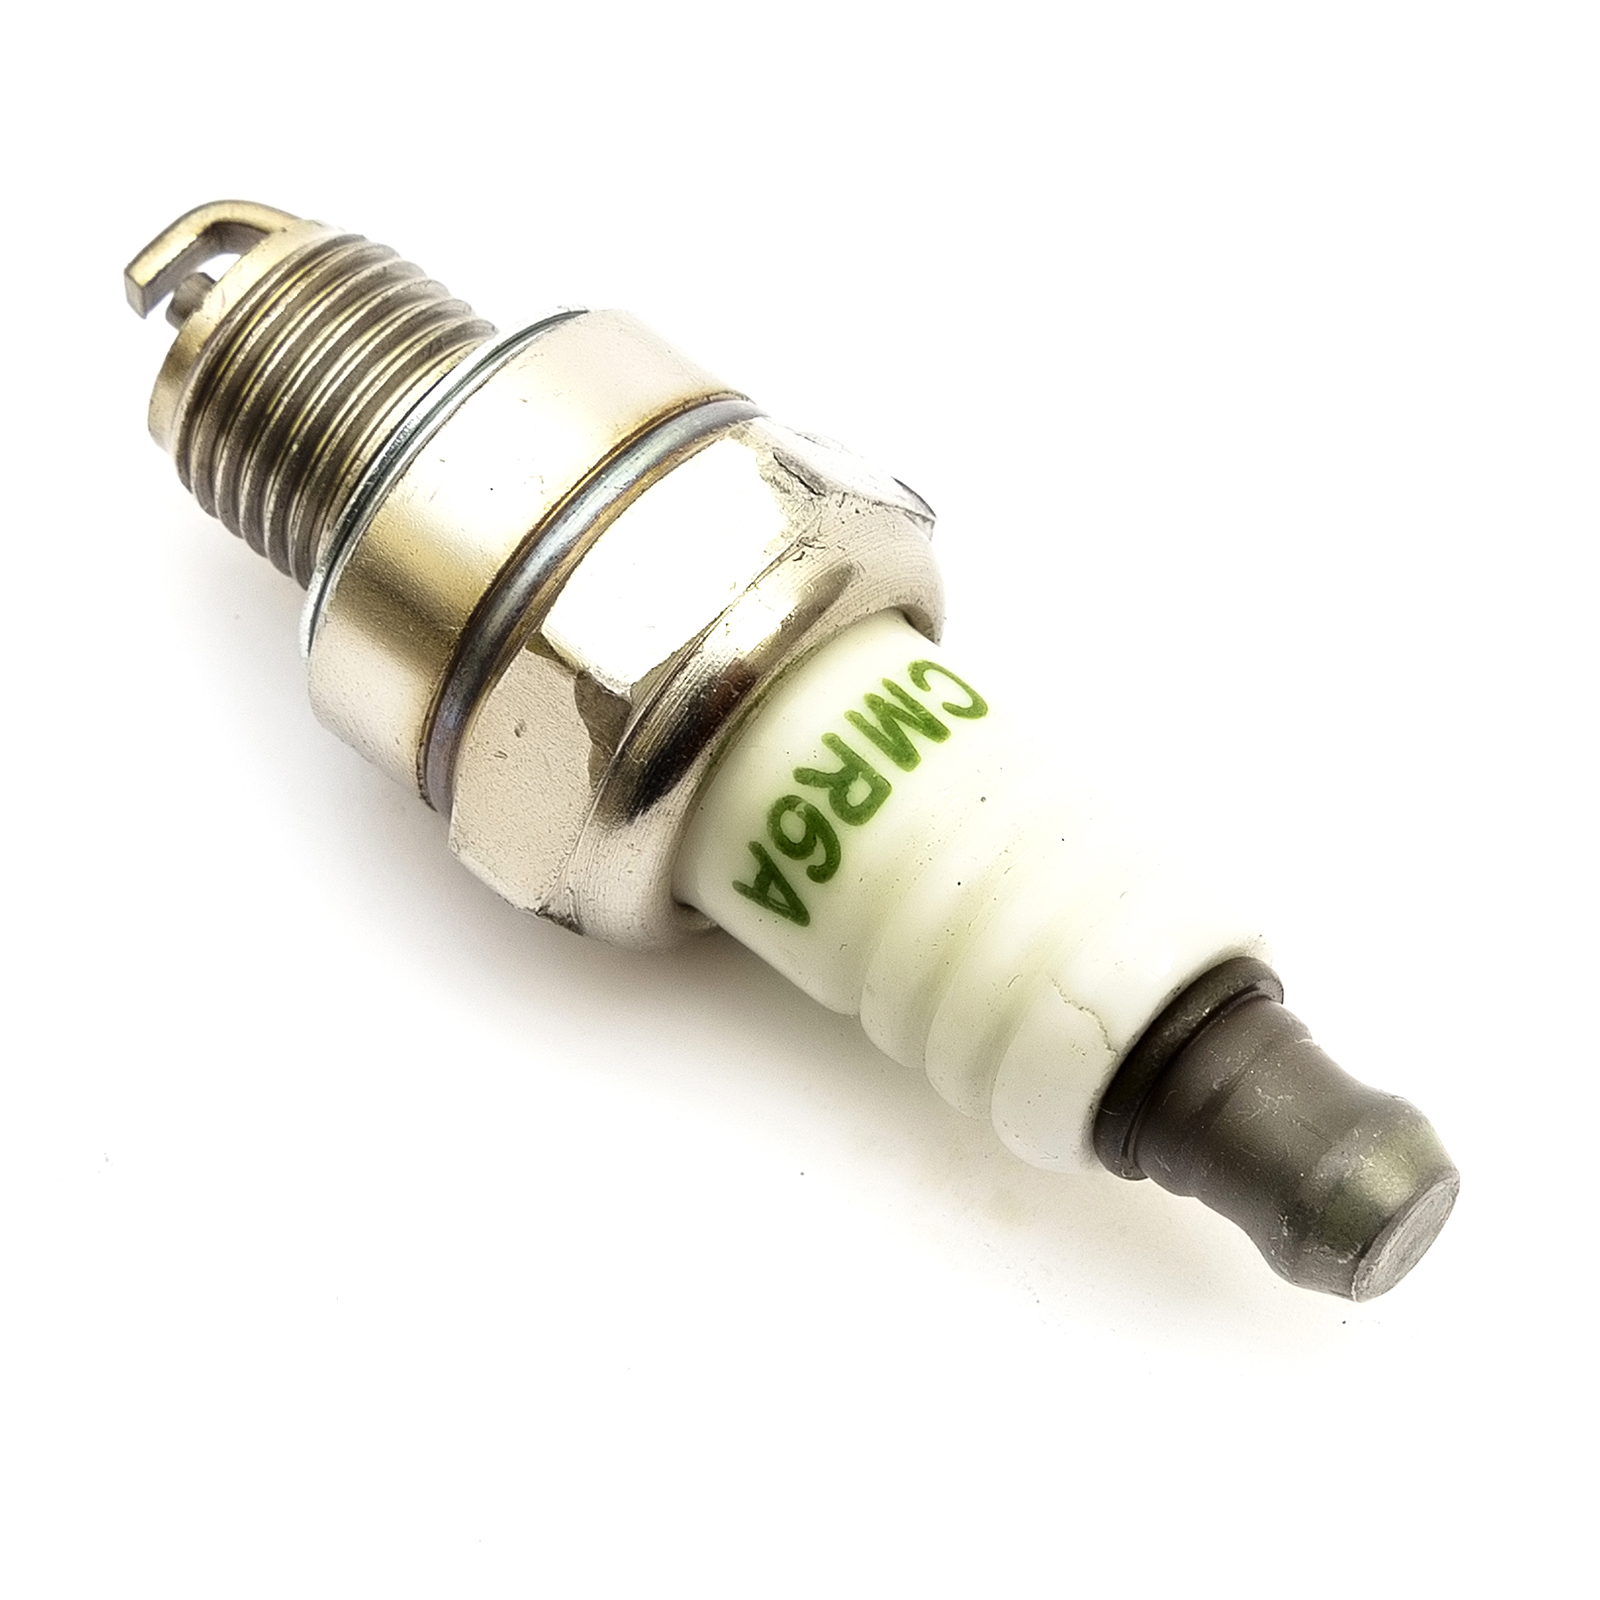 Non Genuine Spark Plug Replaces NGK CMR6A Fits GX25 Engine Leaf Blower